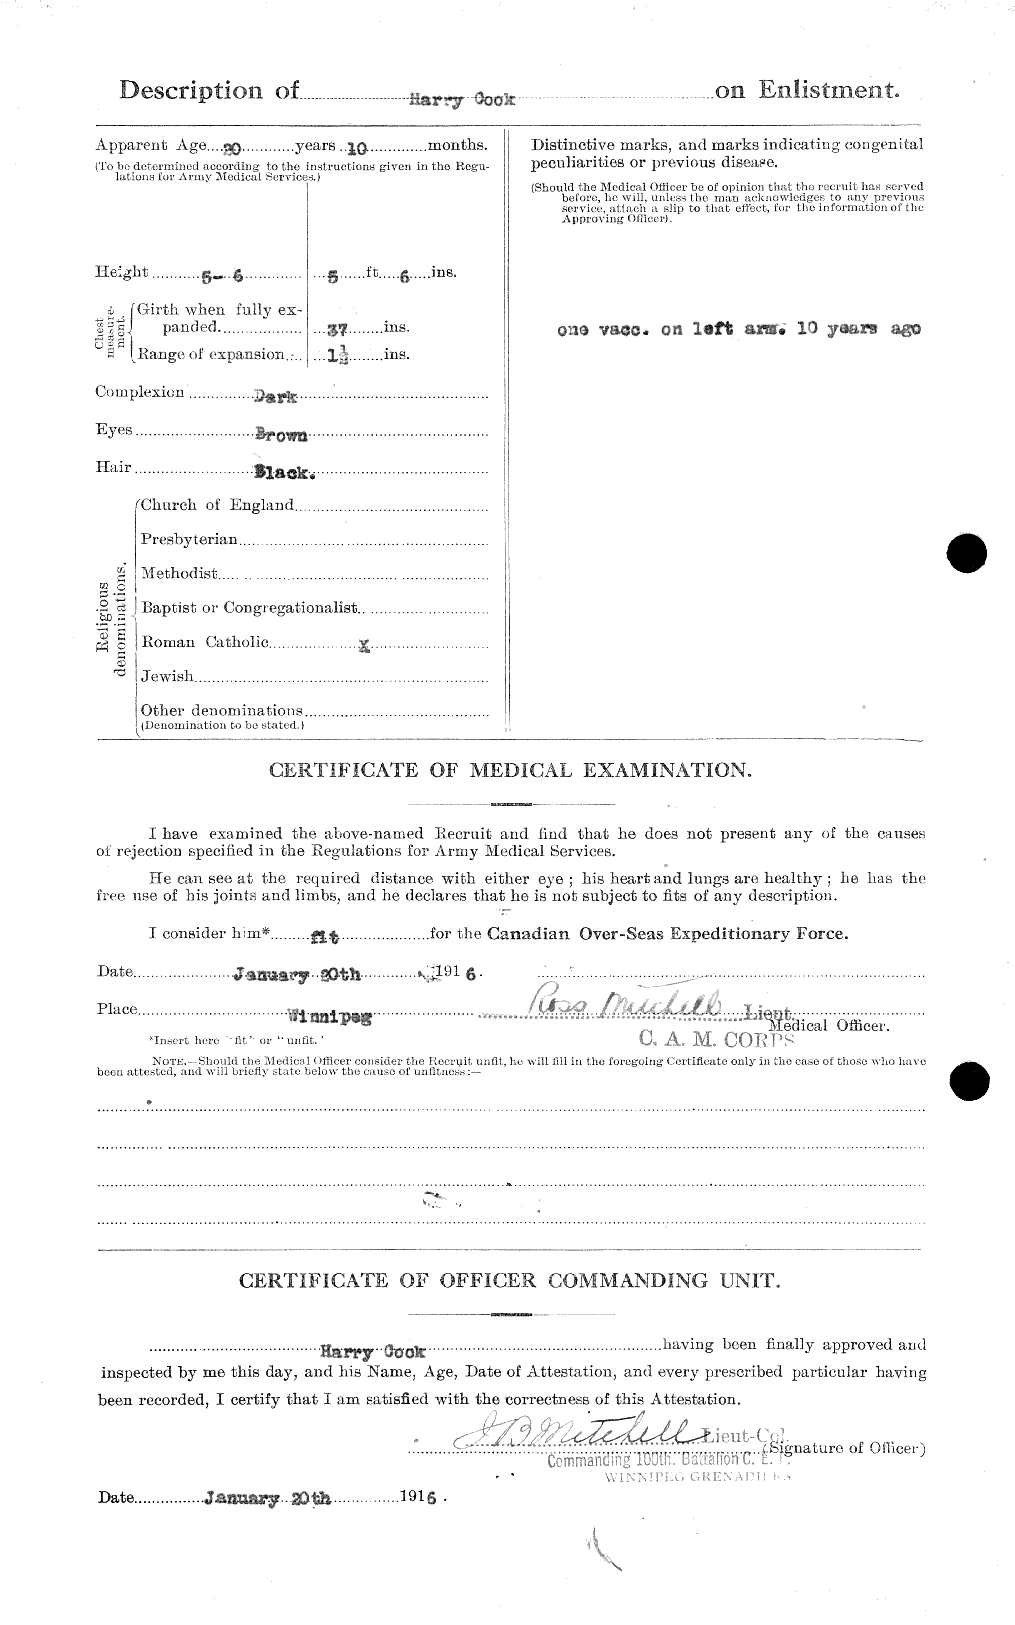 Personnel Records of the First World War - CEF 038812b